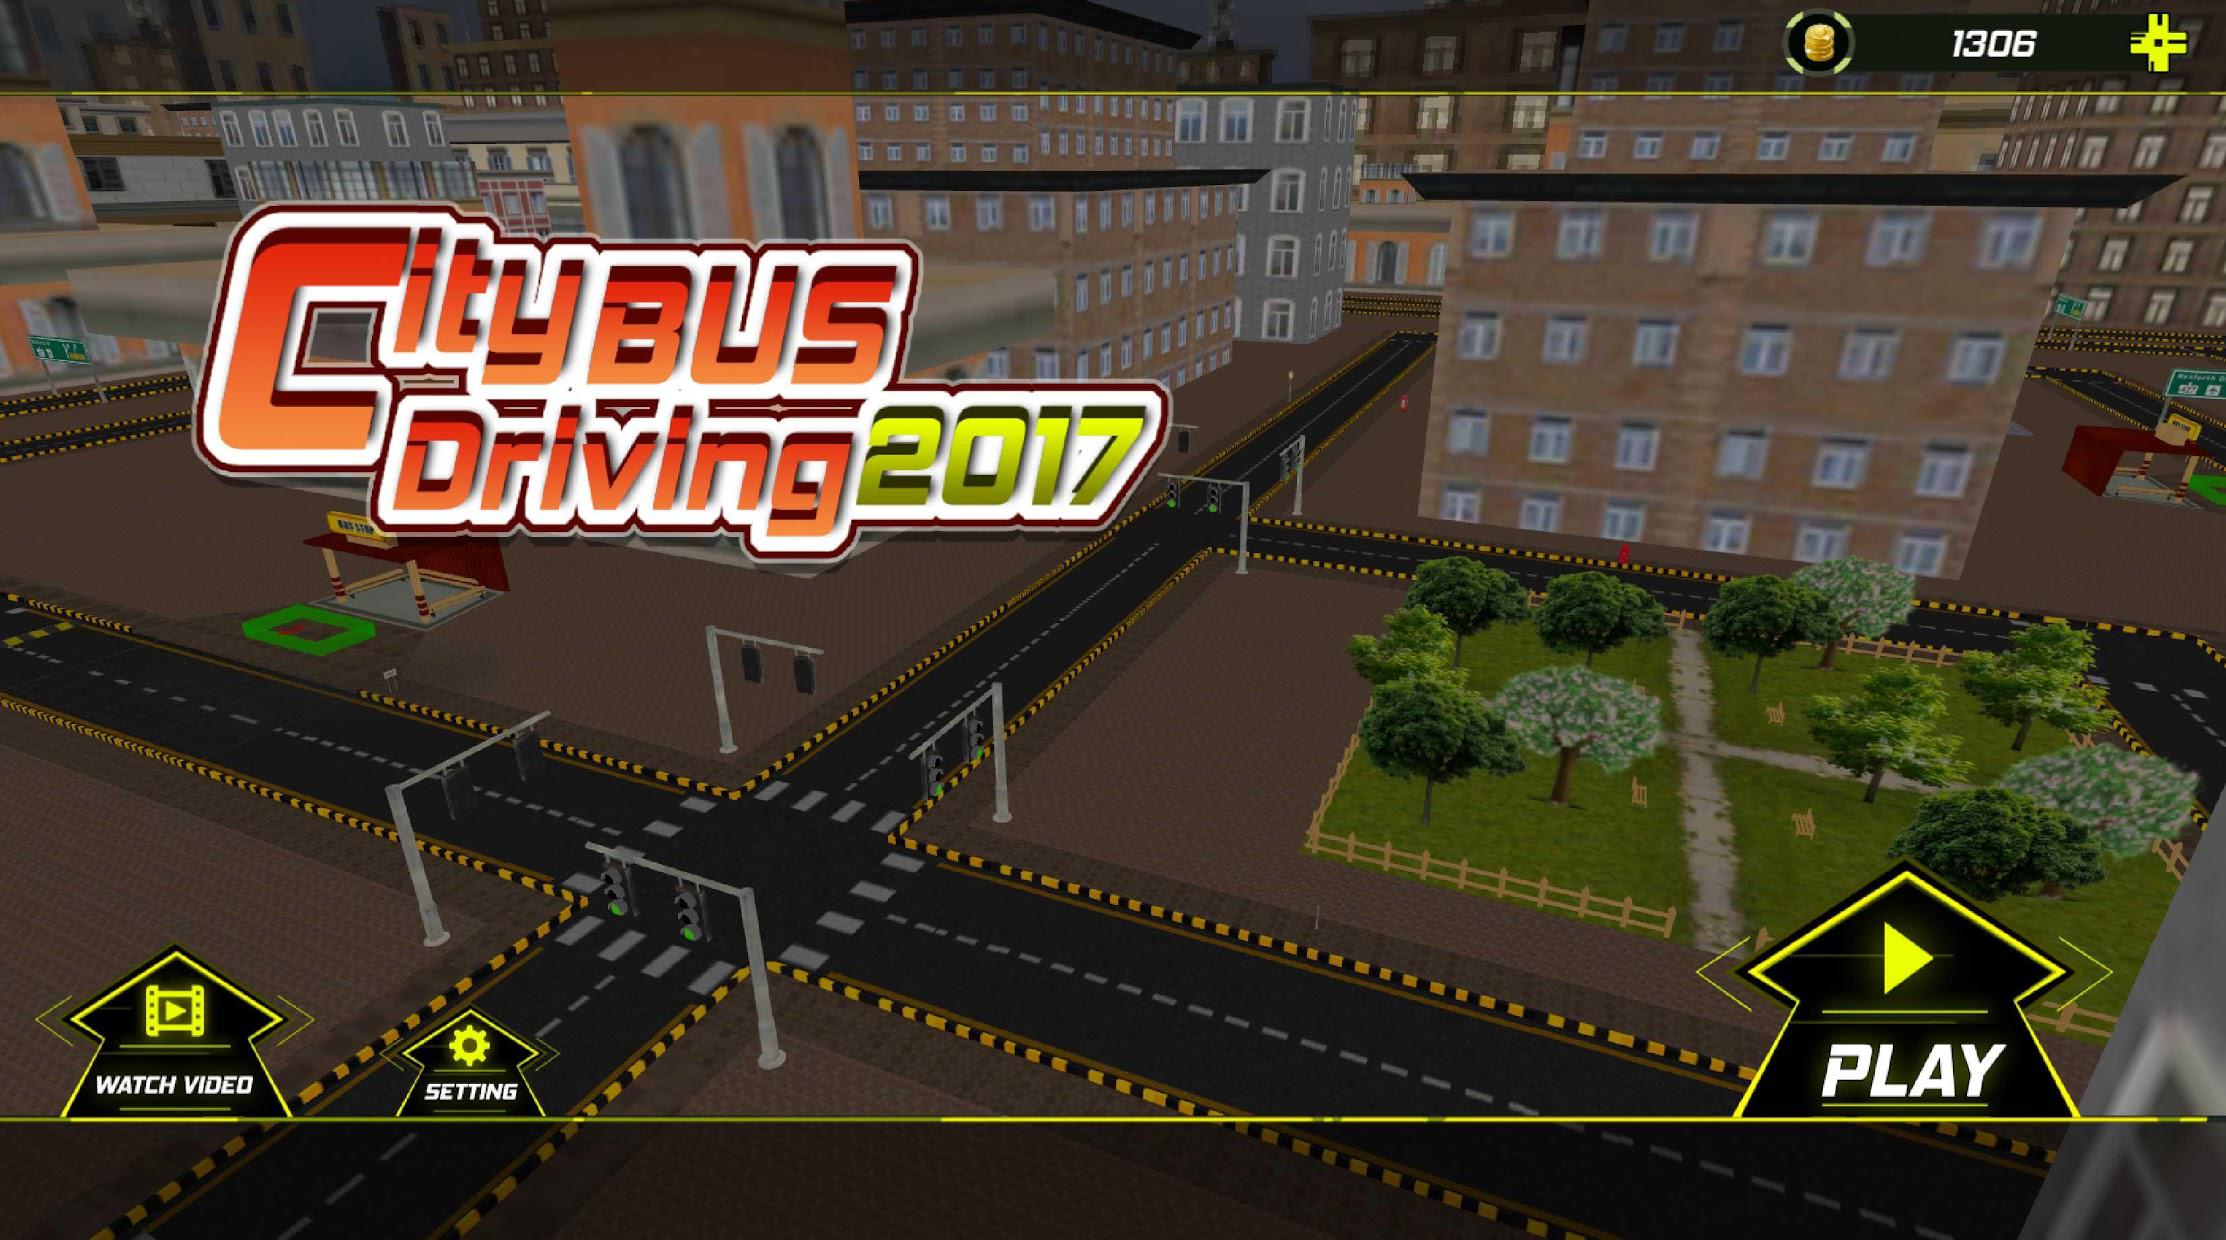 City Bus Driving 2017